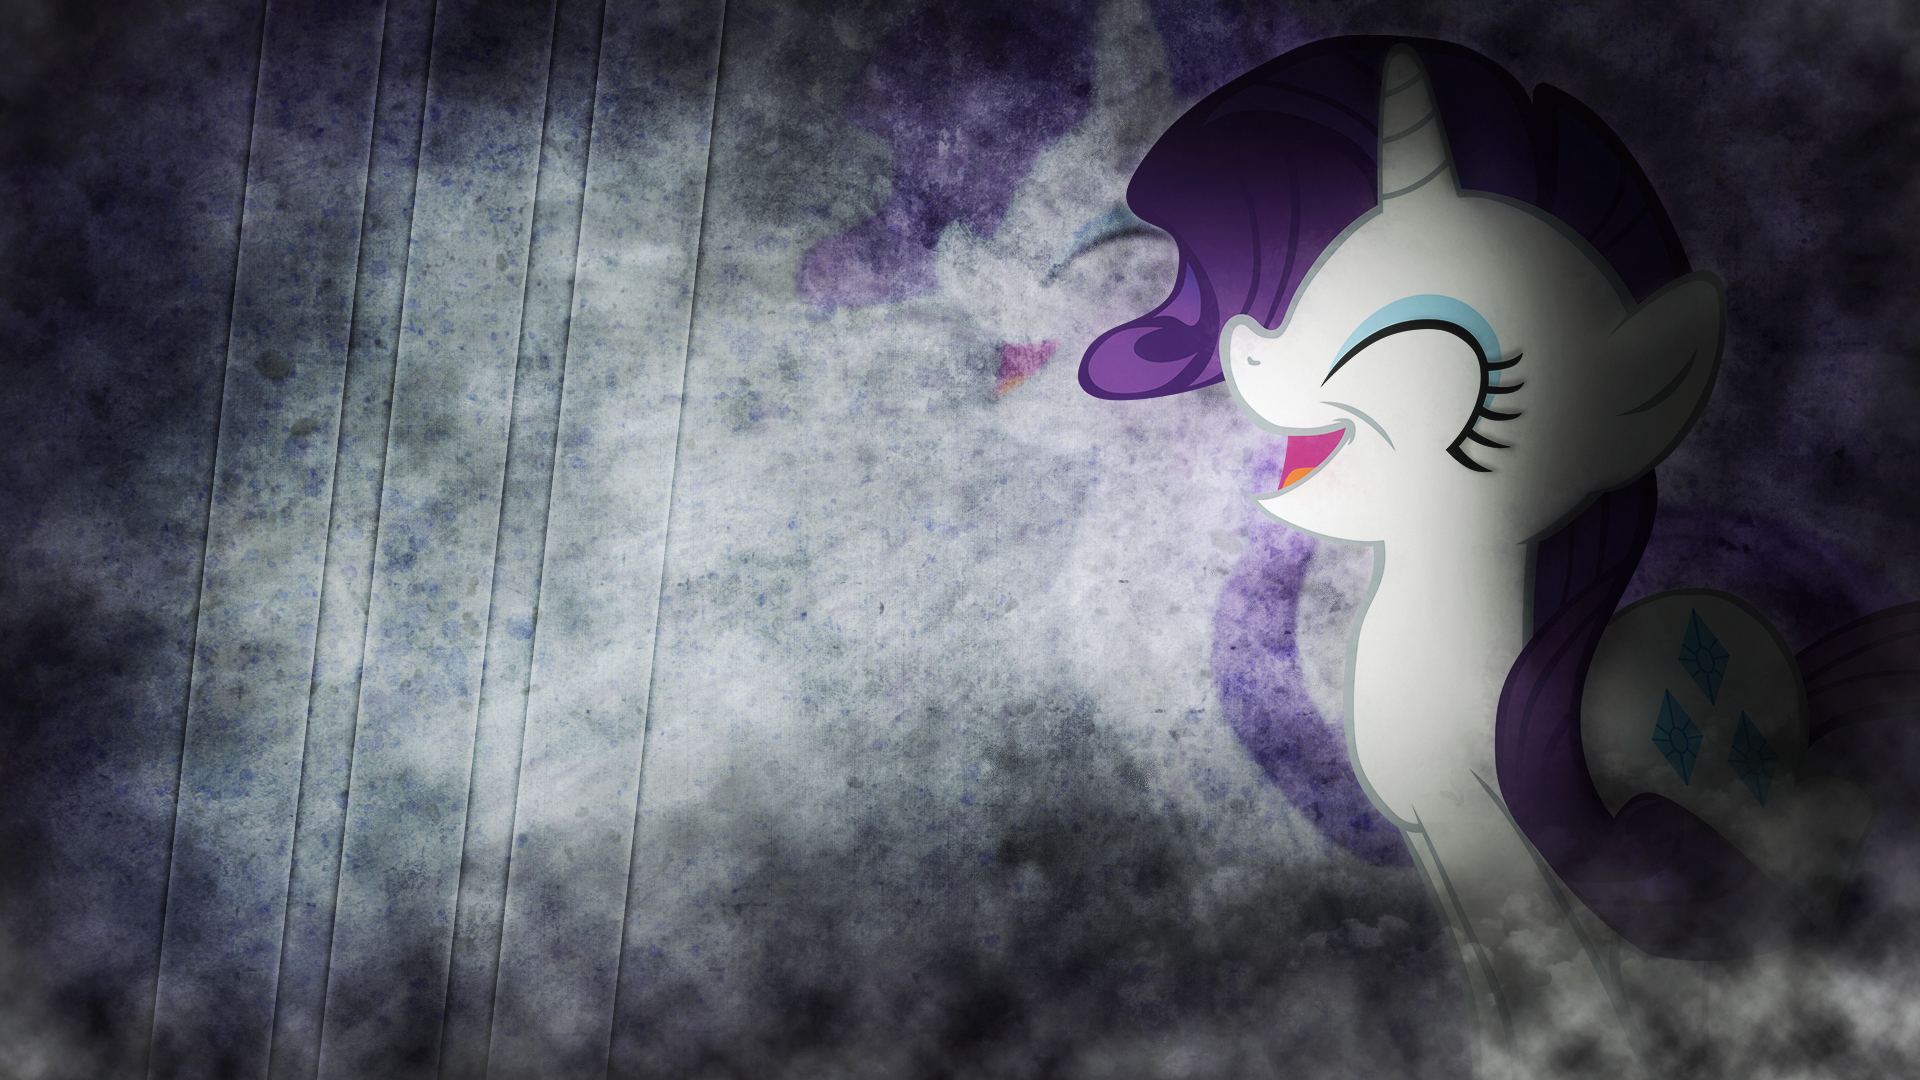 Wallpaper ~ Rarity. by bengo538 and Mackaged